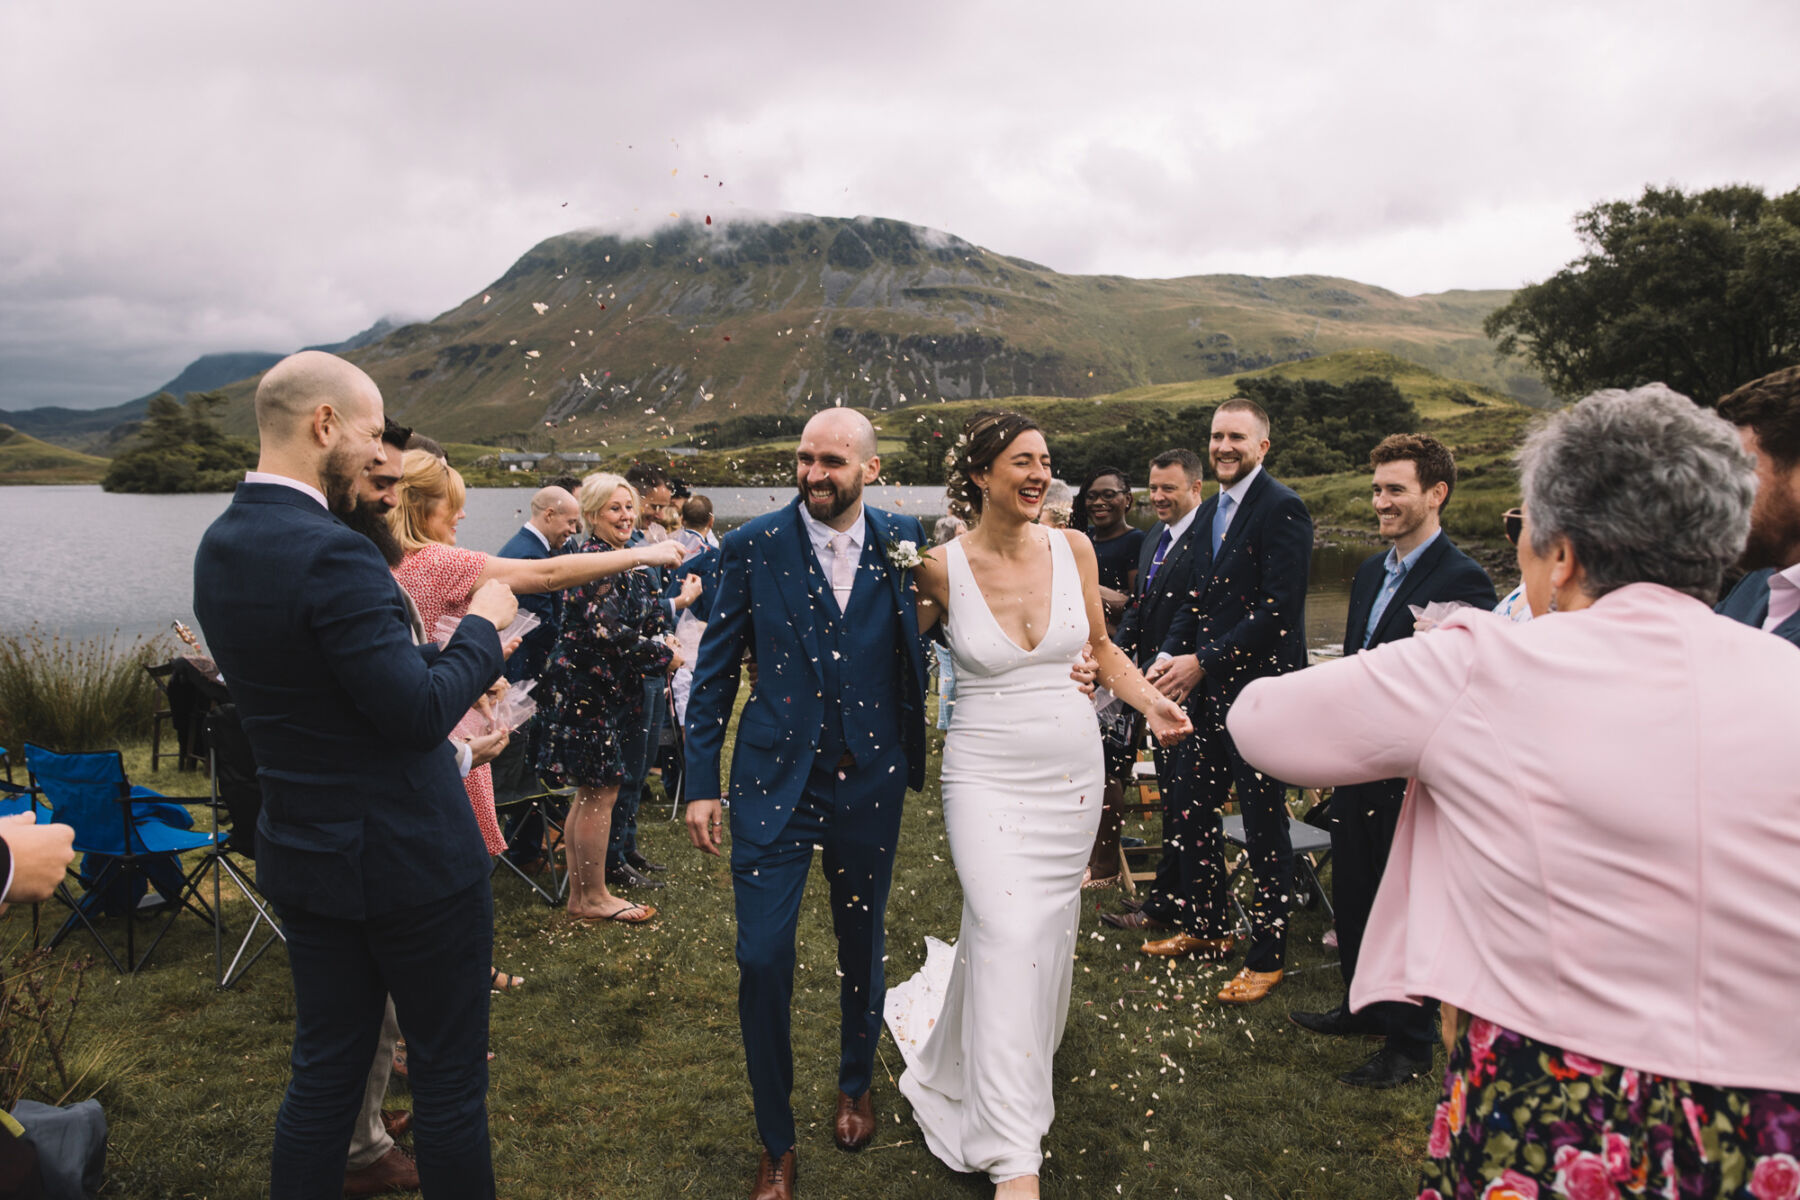 Bride and groom showered in confetti. Outdoor wedding in Wales.